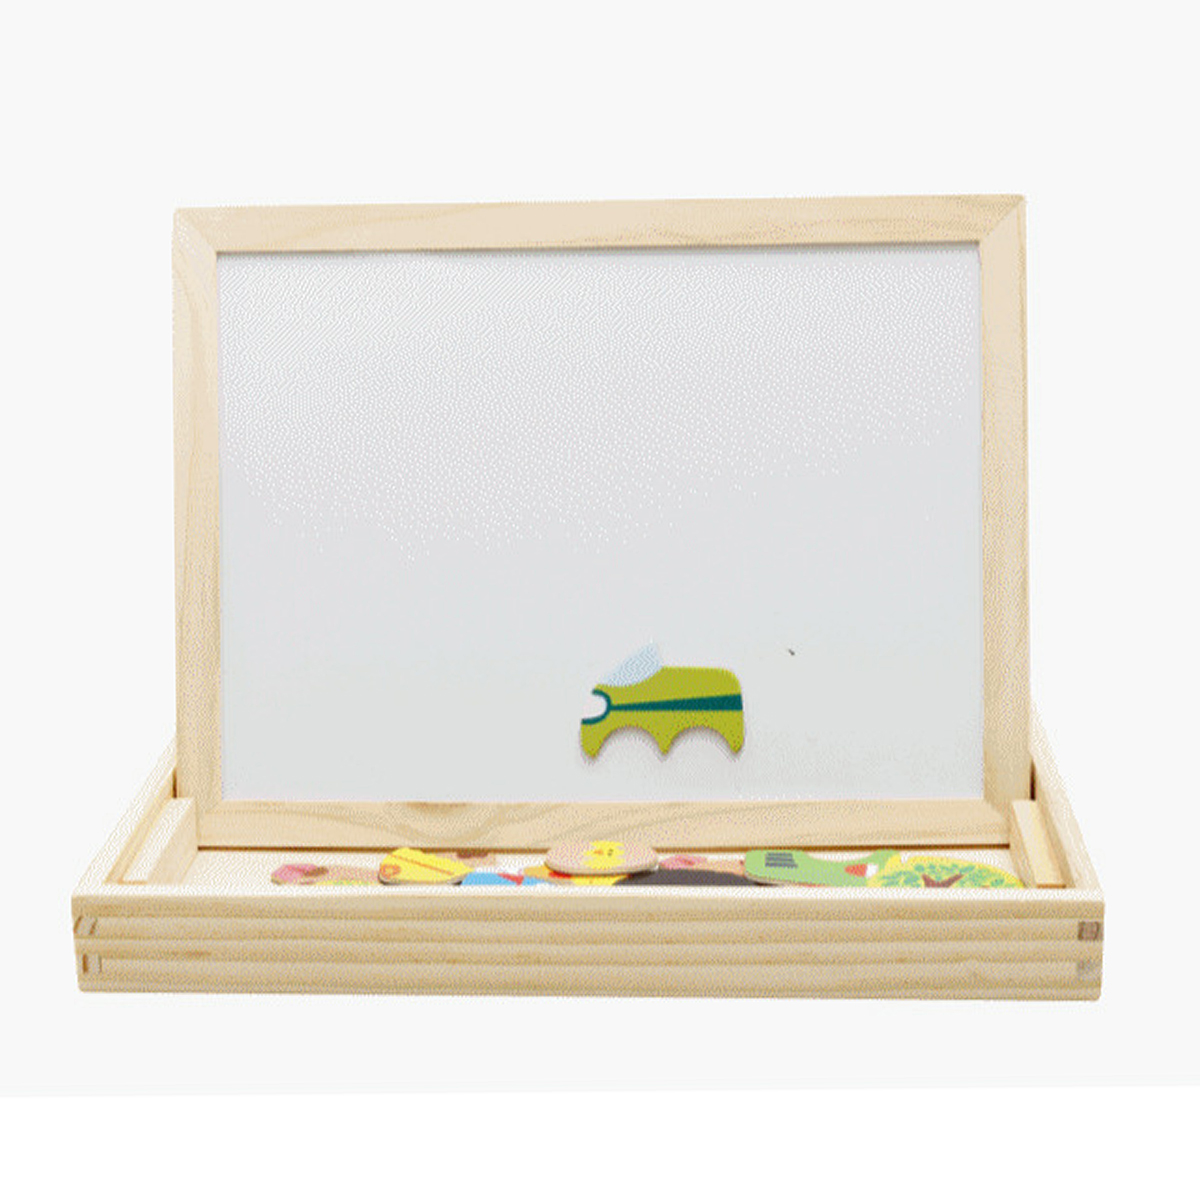 Wooden-DIY-Magnetic-Drawing-Board-Forest-Paradise-Childrens-Early-Educational-Learning-Toys-1676971-9